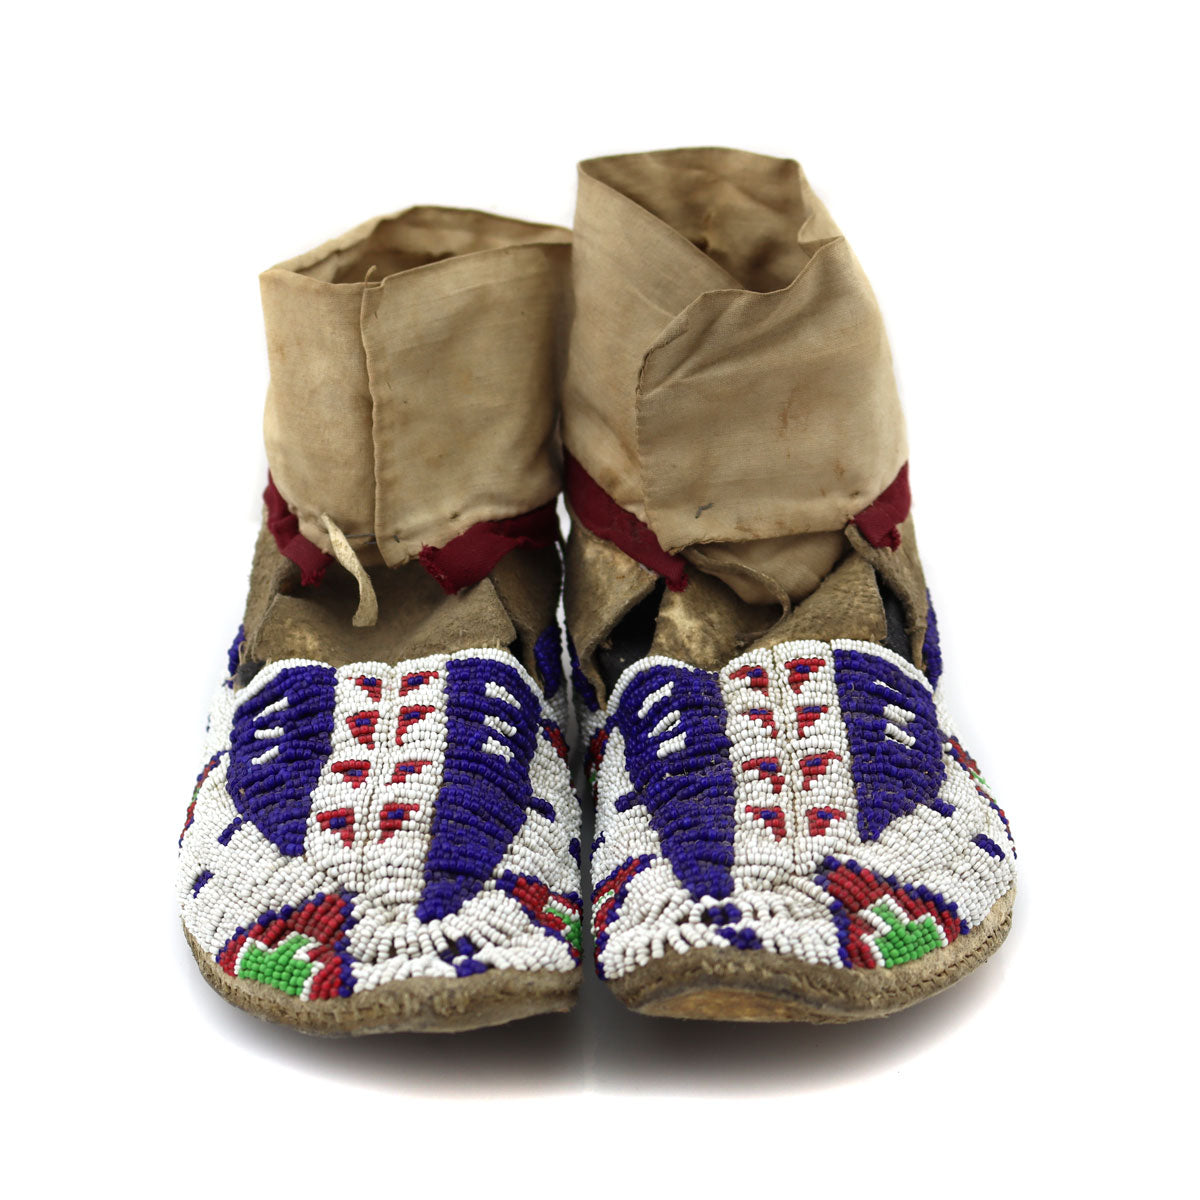 Sioux Beaded Leather Moccasins c. 1890s, 2.75" x 8.5" x 3.25" (DW91963-1021-019)1